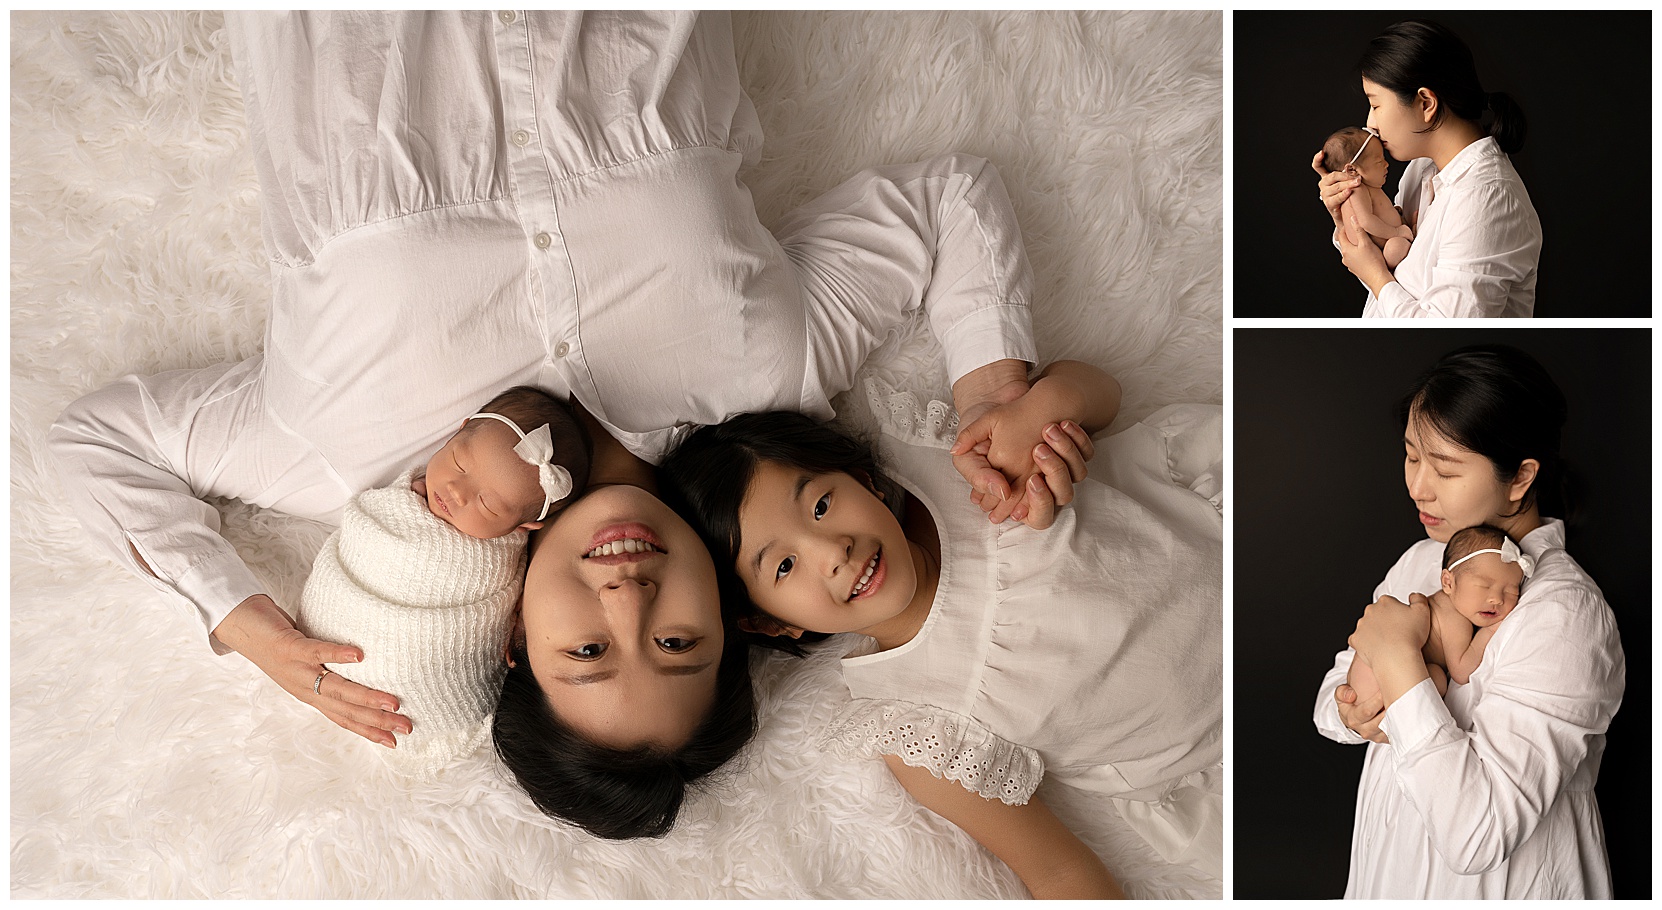 Color photo montage of mother and two daughters: one daughter is a young girl, one is a newborn. First photo includes all three and is taken on a white sheepskin background, second two photos on a black background feature just mom and newborn. 